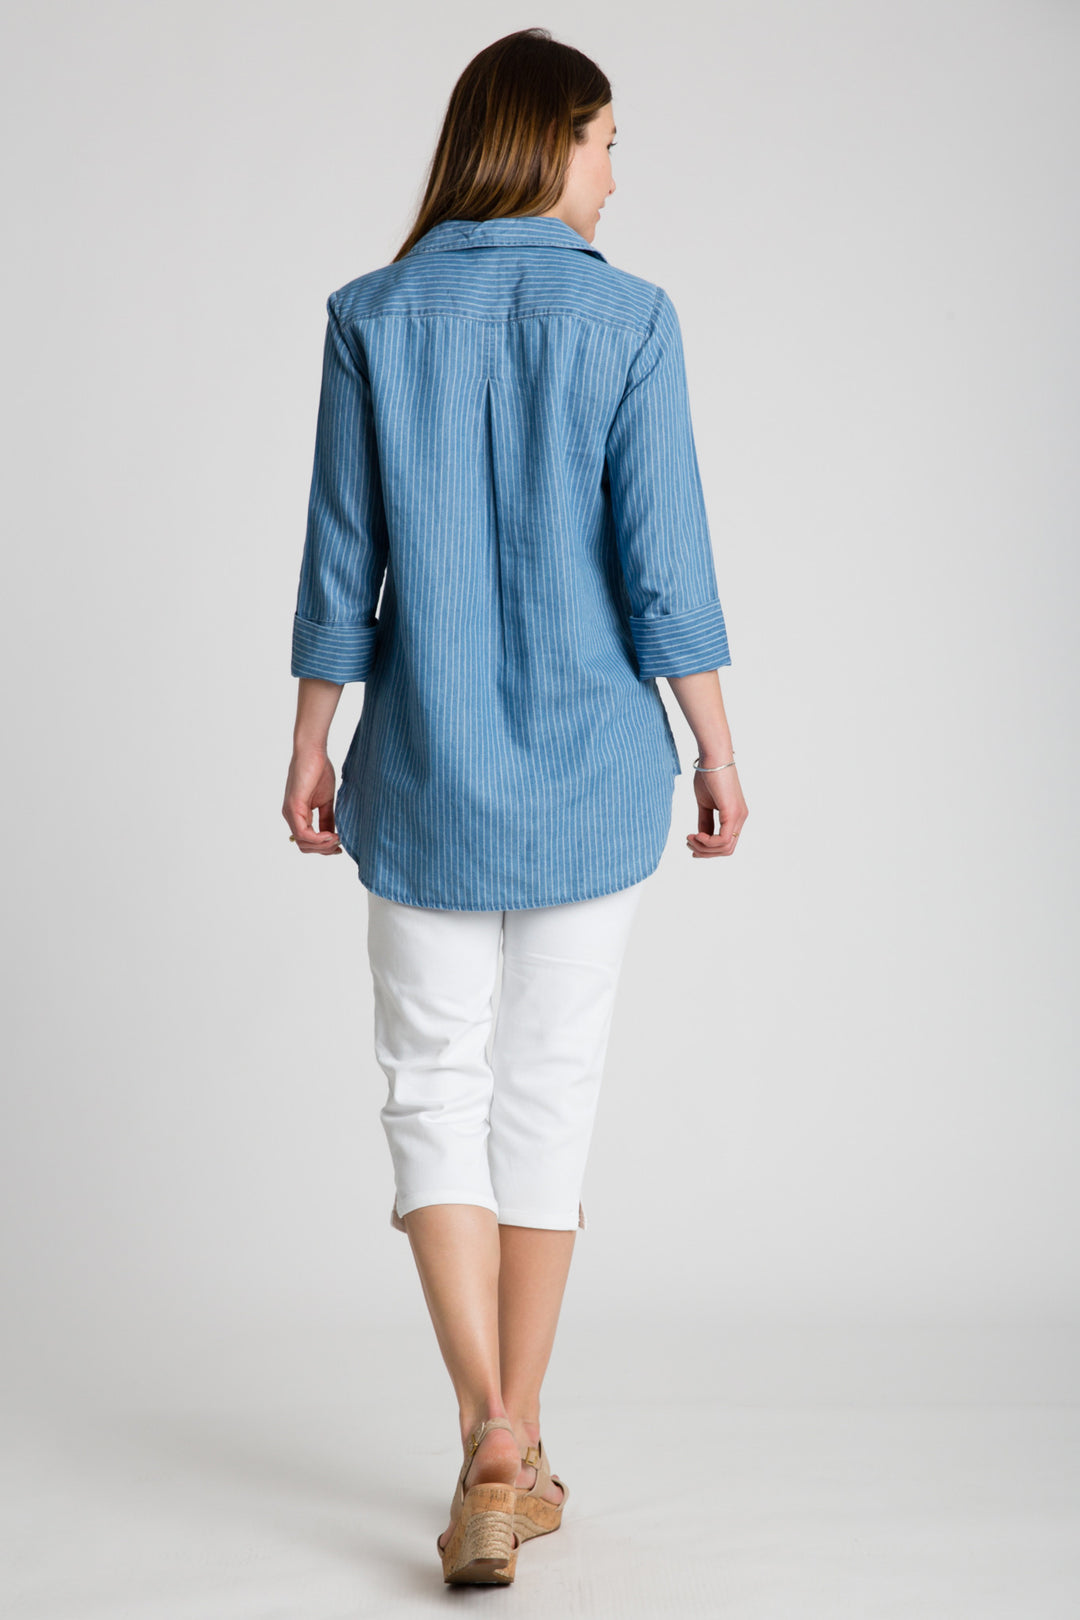 Denim Cuffed 3/4 Sleeve Button Front Top - INTROclothing